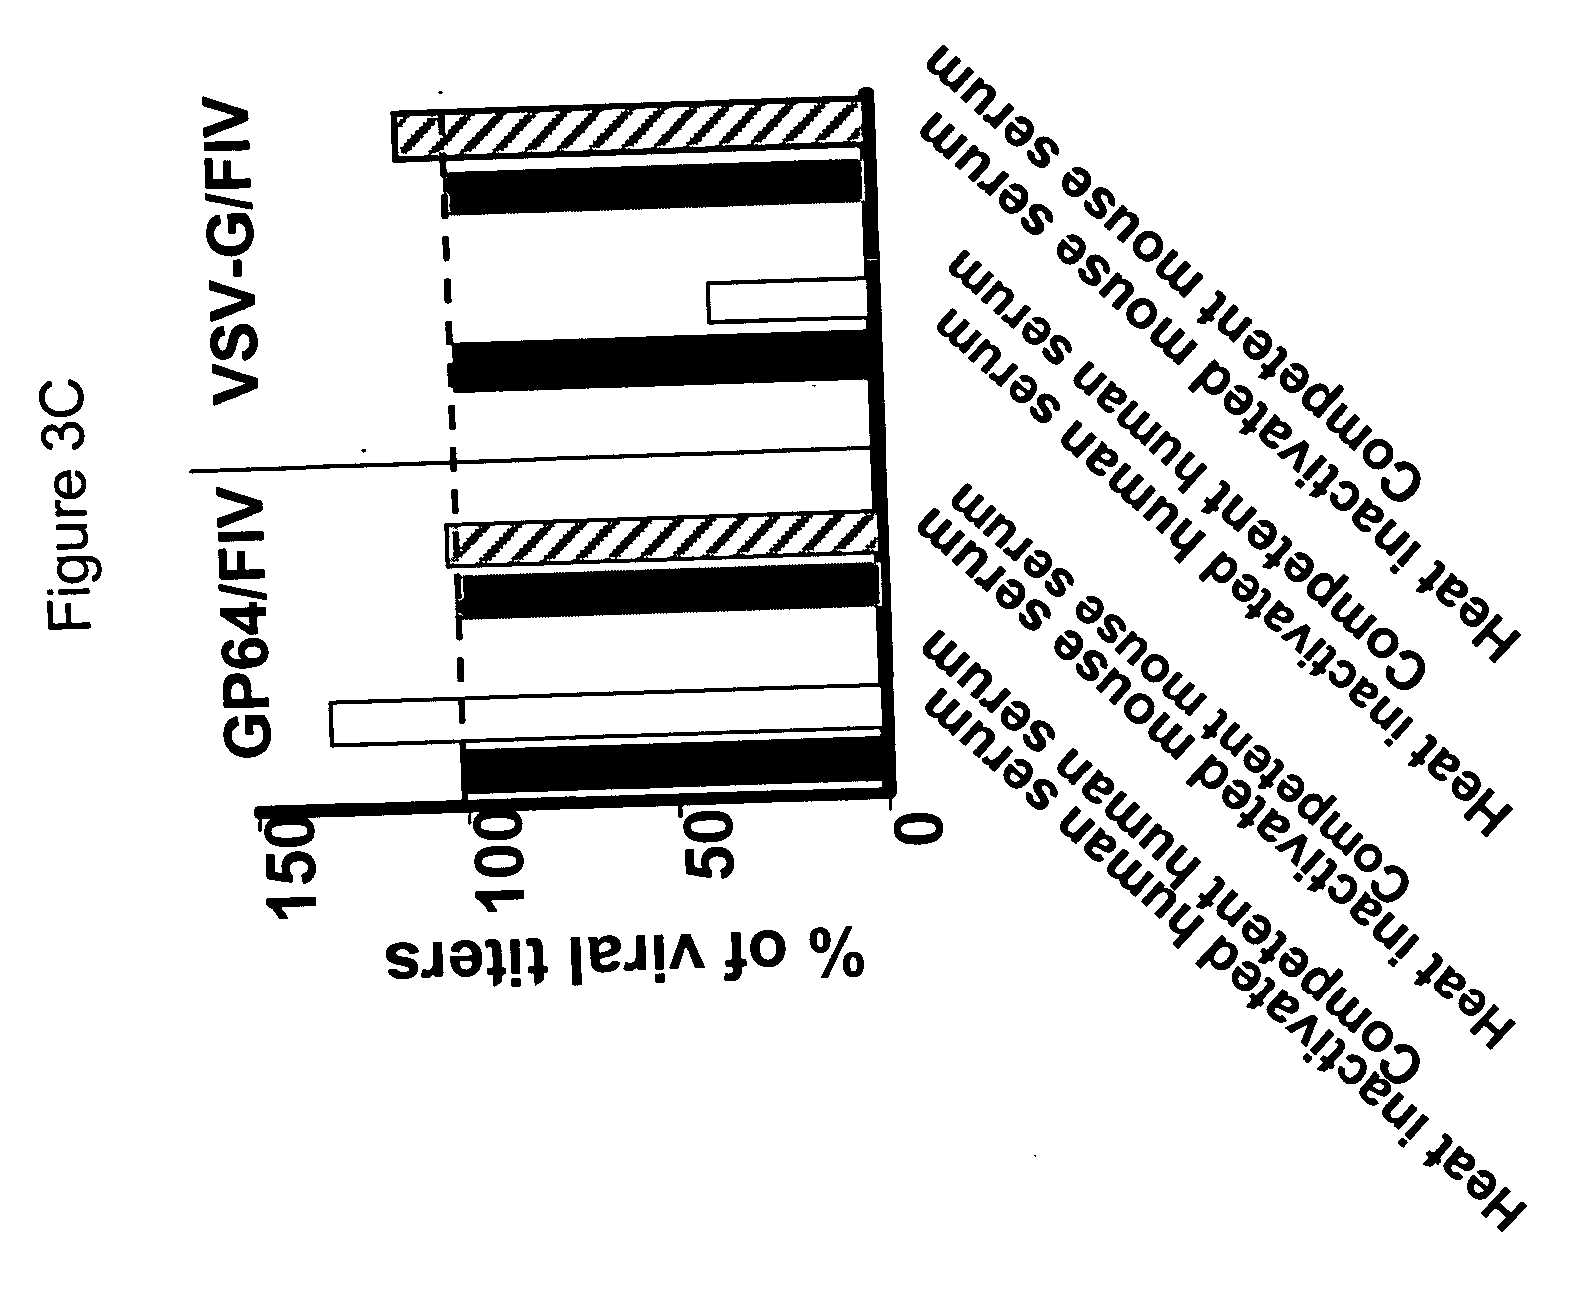 Methods for producing and using in vivo pseudotyped retroviruses